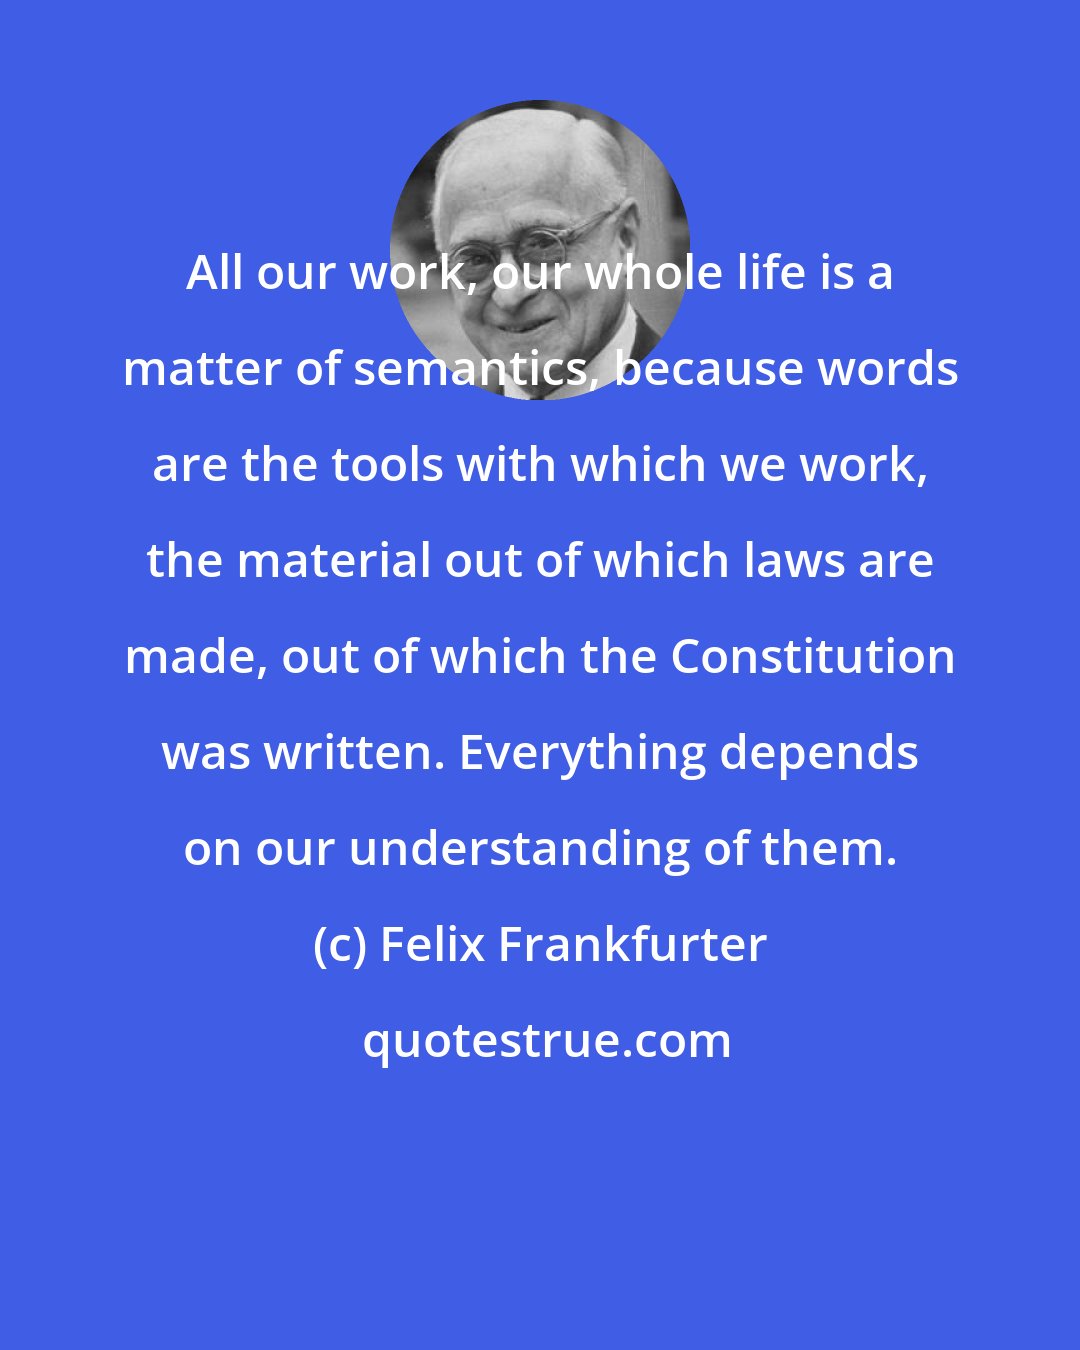 Felix Frankfurter: All our work, our whole life is a matter of semantics, because words are the tools with which we work, the material out of which laws are made, out of which the Constitution was written. Everything depends on our understanding of them.